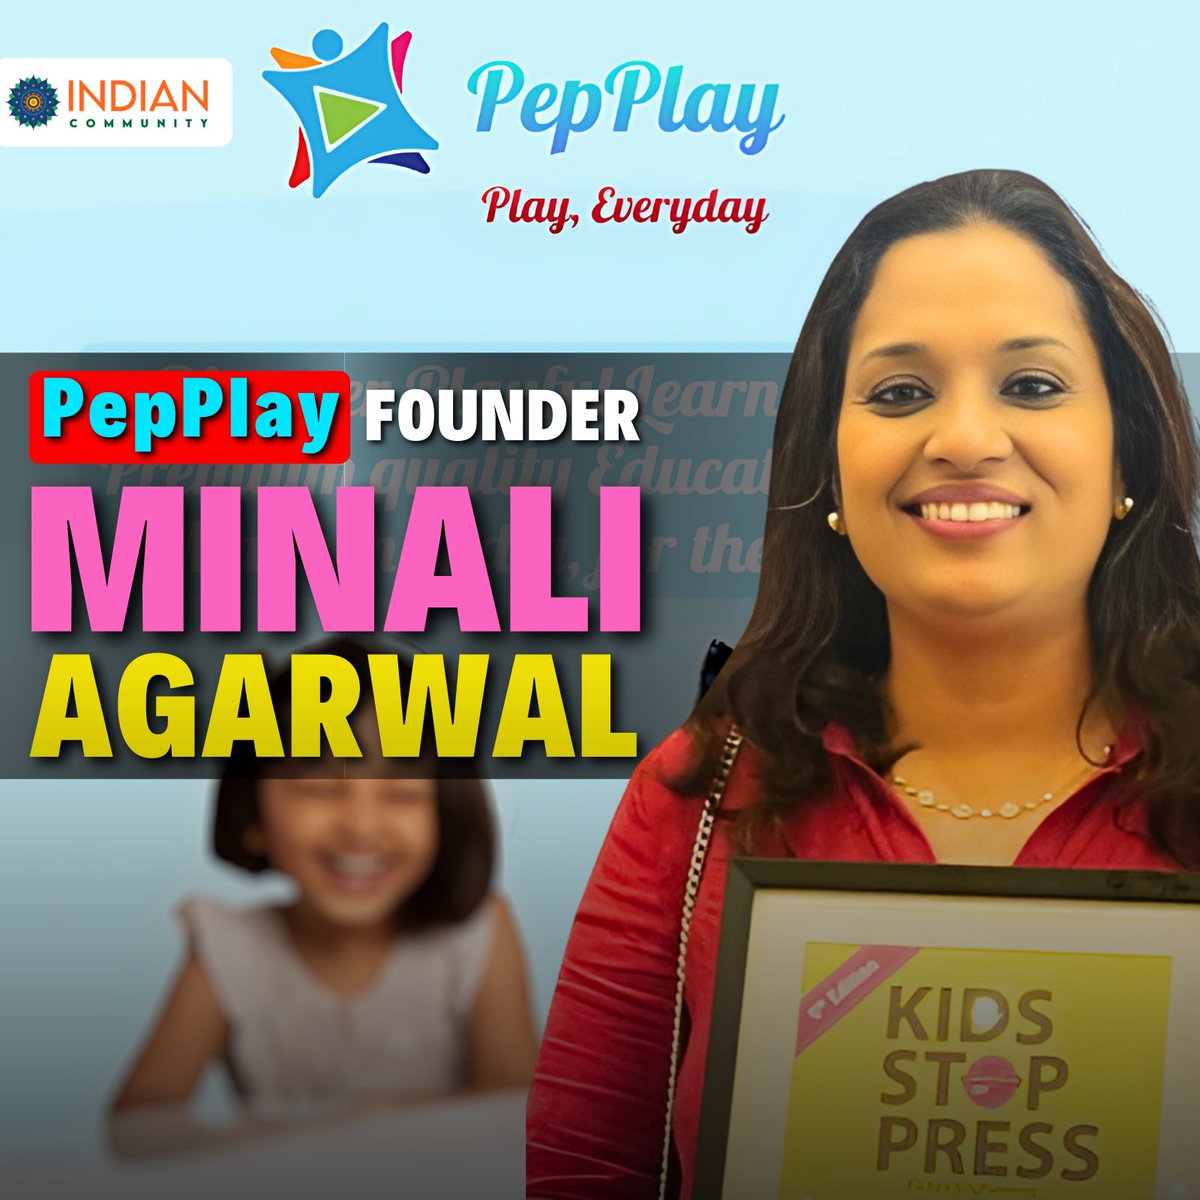 Toy Industry Revolution: Minali Agrawal's Inspirational PepPlay Journey on Indian Community  #22

Watch the episode here - indian.community/minali-agrawal…

#MinaliAgarwal
#IndianCommunity
#ToyIndustry